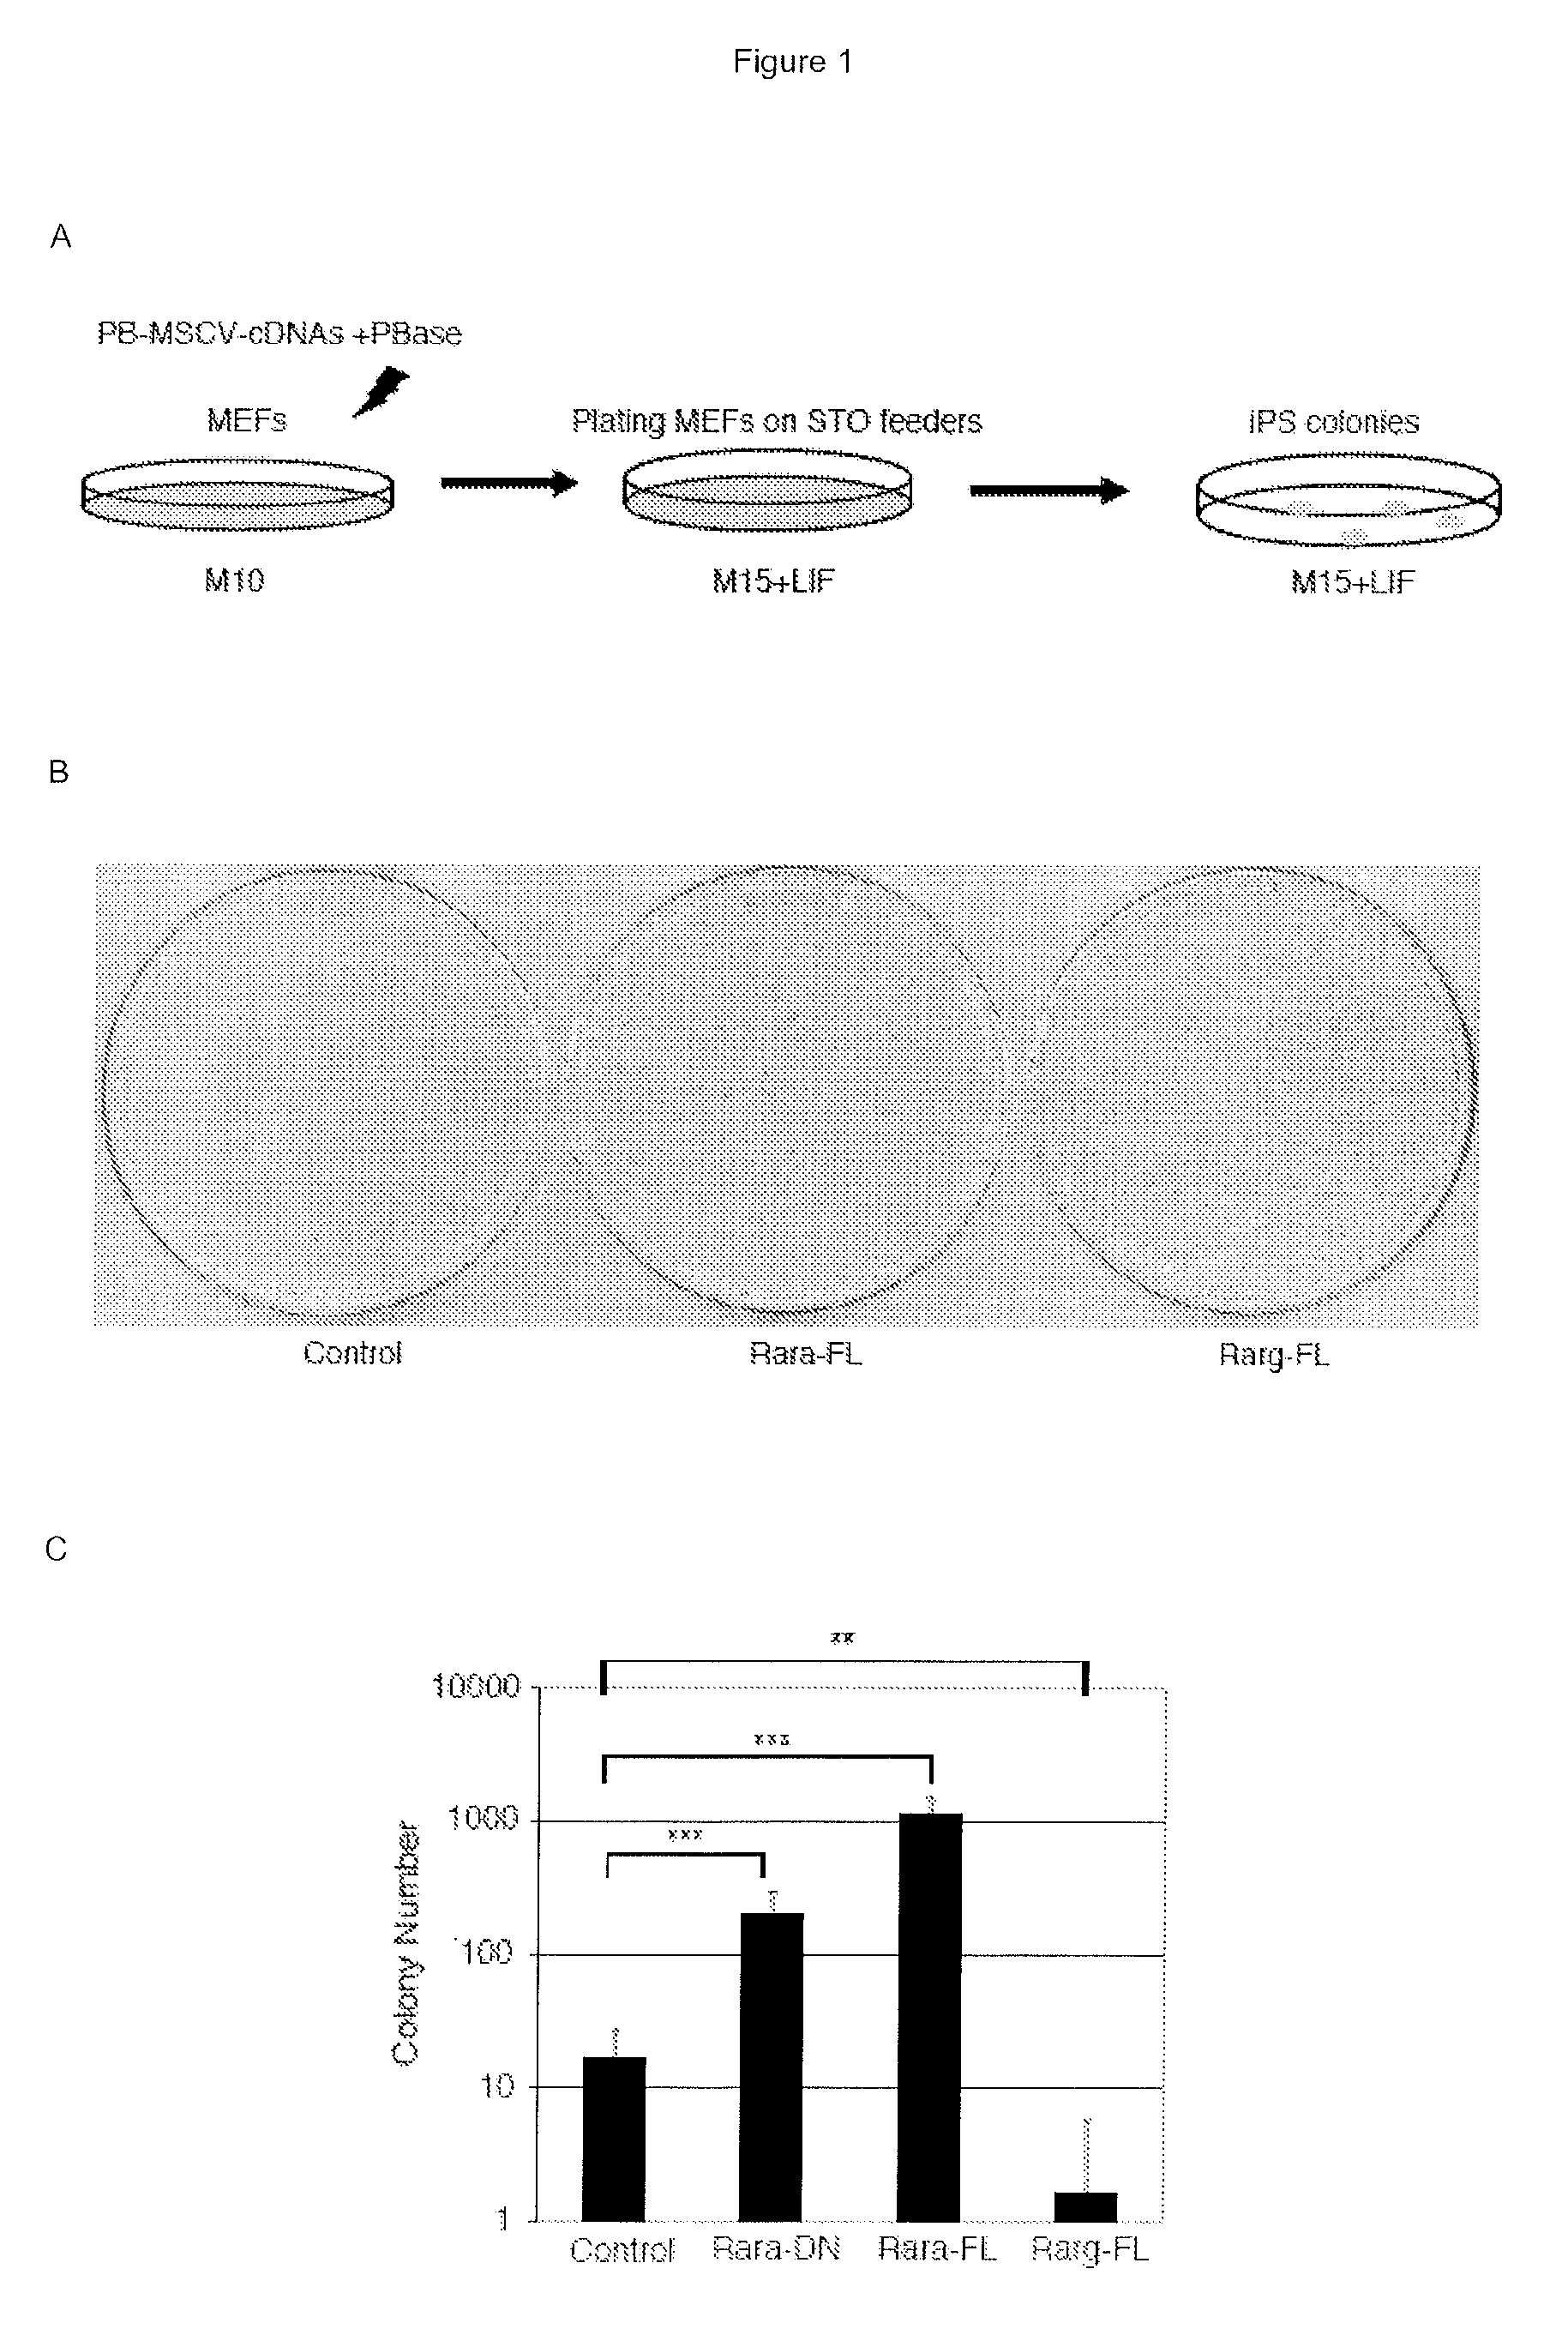 Cells and methods for obtaining them